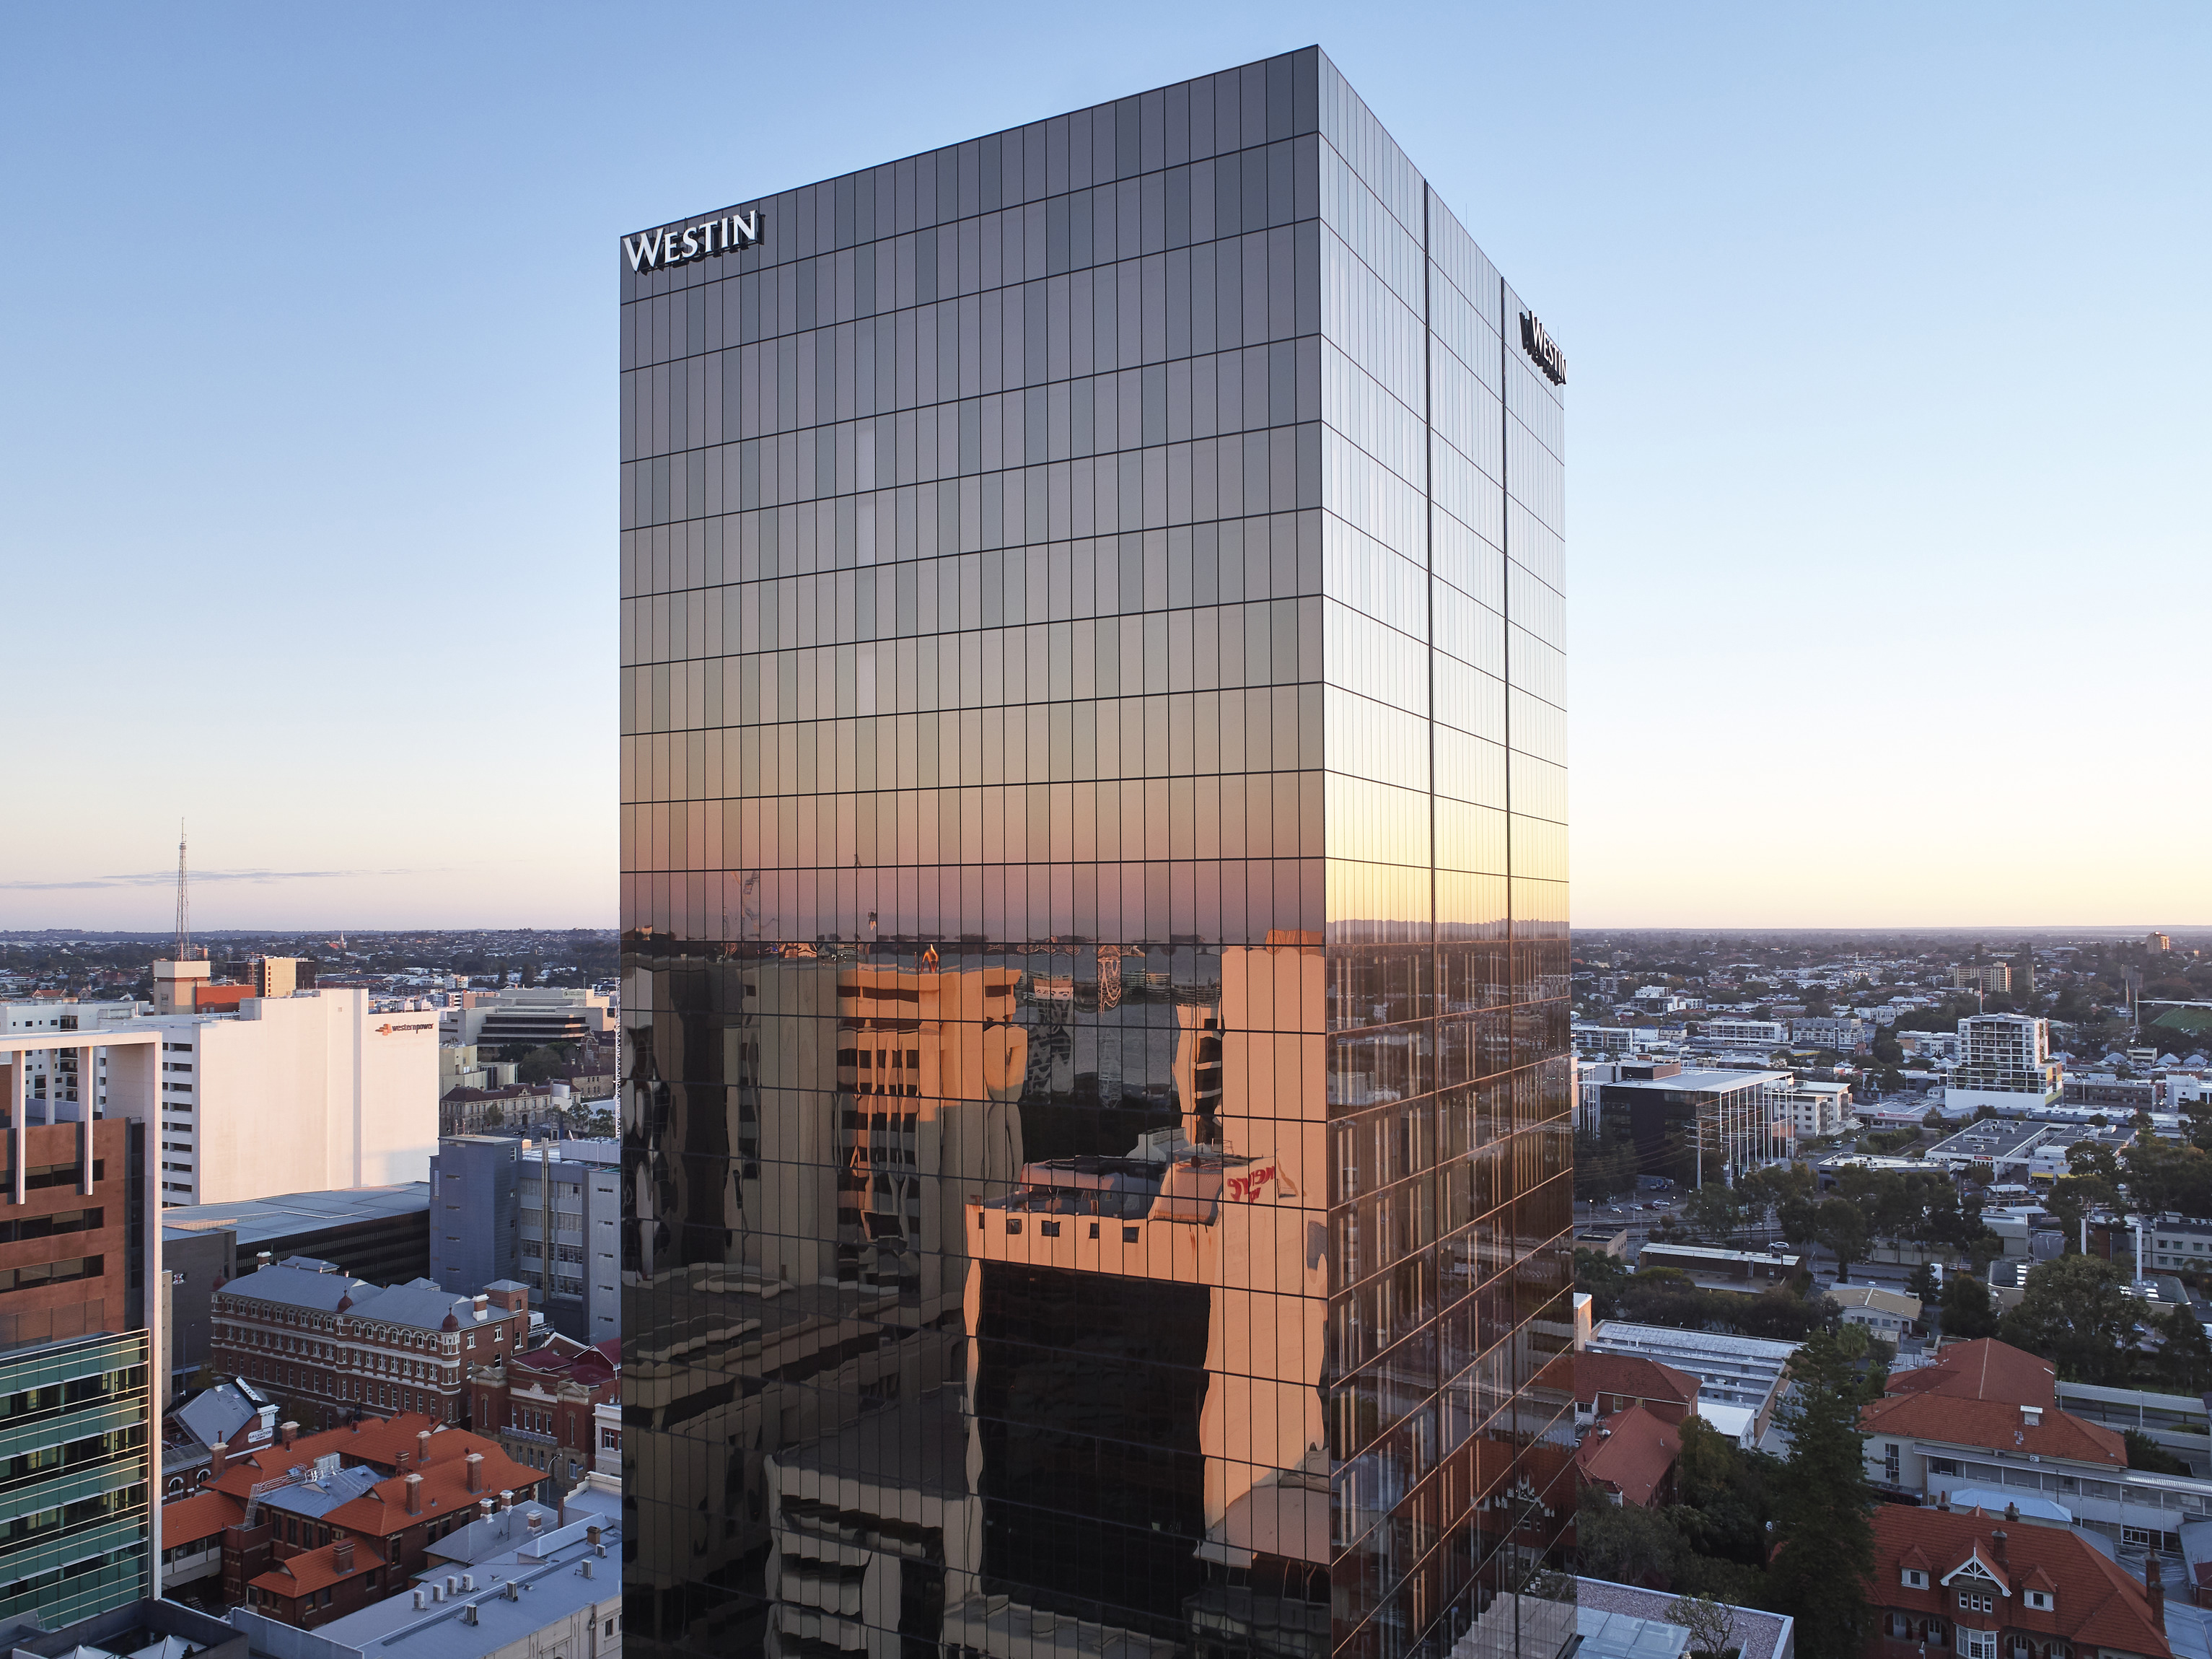 The new Hibernian Place incorporating the five-star Westin hotel along with a thoughtfully curated mix of hospitality operators is the latest &lsquo;urban oasis&rsquo; for Perth residents. Image: Supplied
